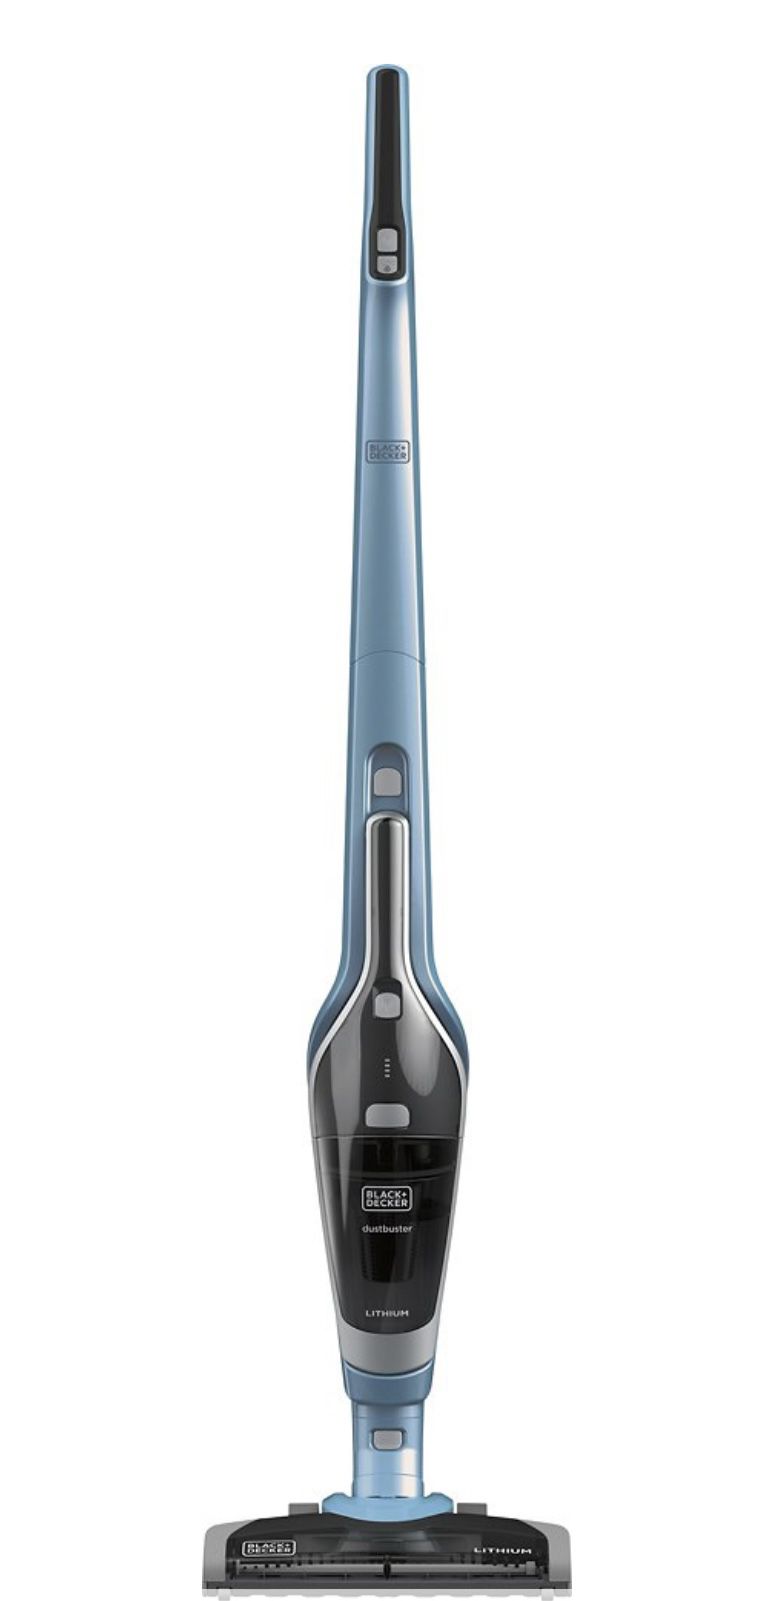 Black Decker Bagless Handheld / Stick Vacuum, Sea blue. In Excellent Condition!   They retail at best buy for $120 and they are out of stock.